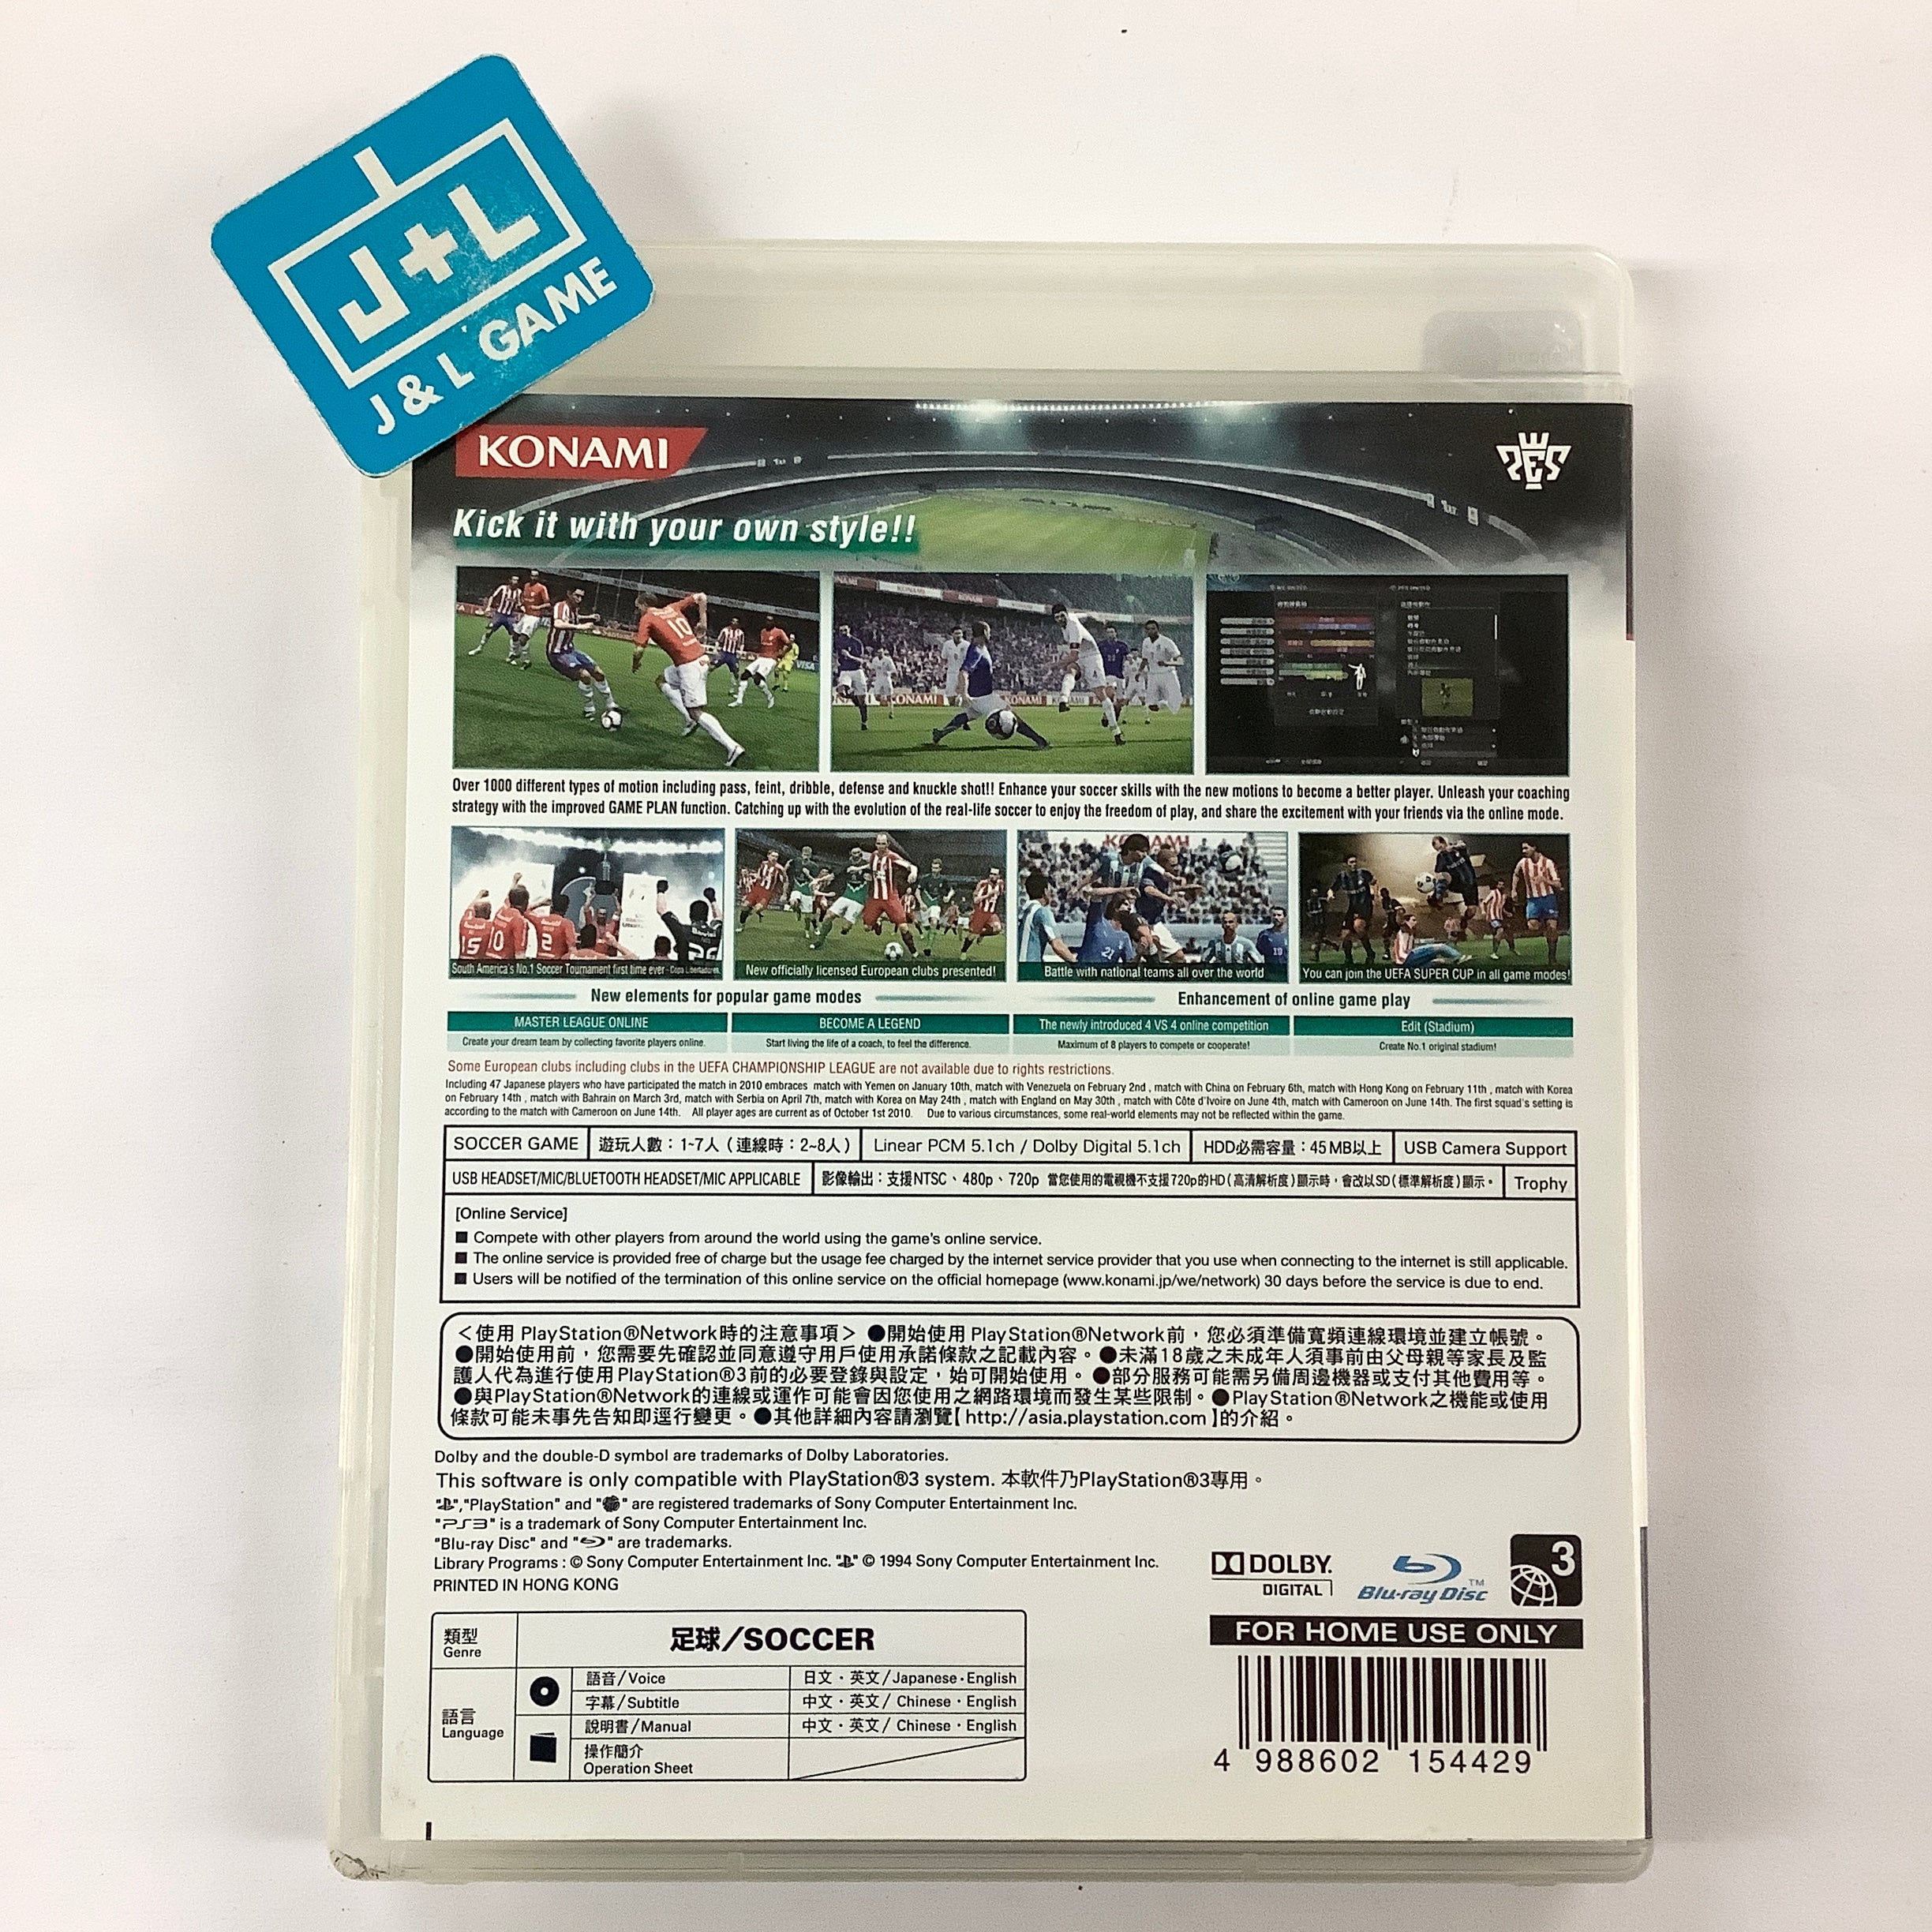 World Soccer Winning Eleven 2011 - (PS3) PlayStation 3 [Pre-Owned] (Asia Import) Video Games Konami   